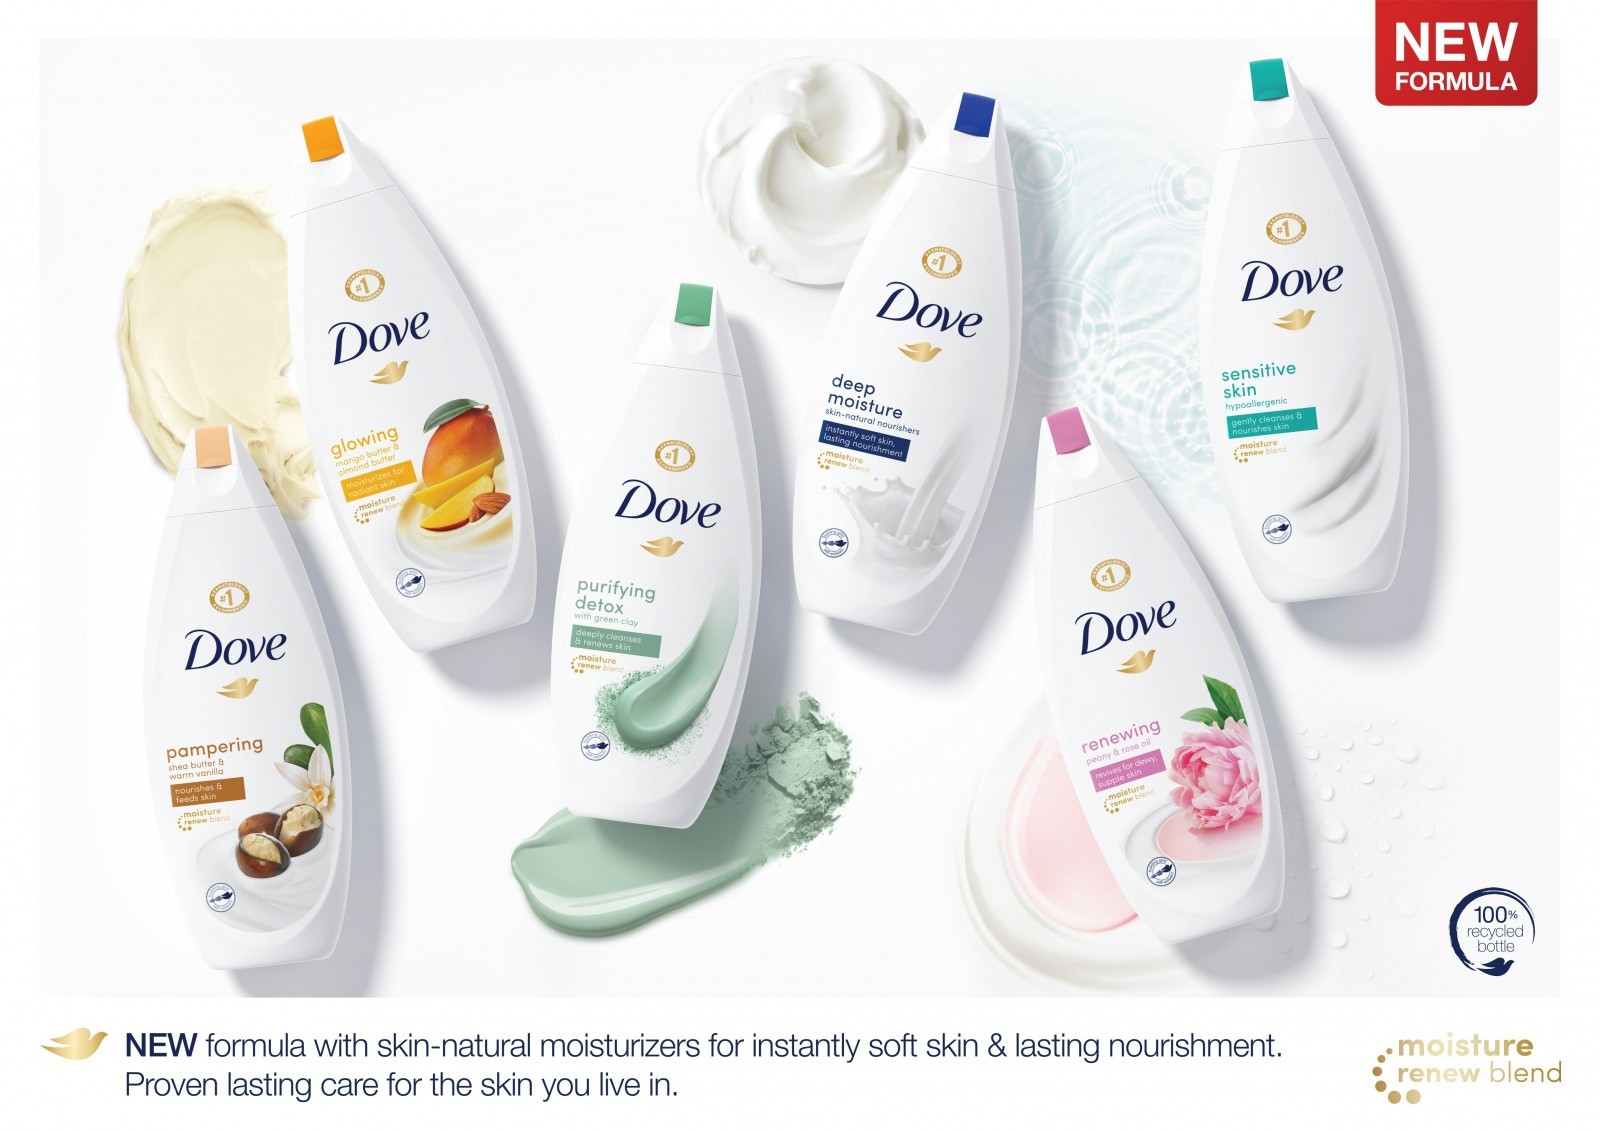 forceMAJEURE-Design-Dove-Body-Wash-Global-Relaunch1.jpg